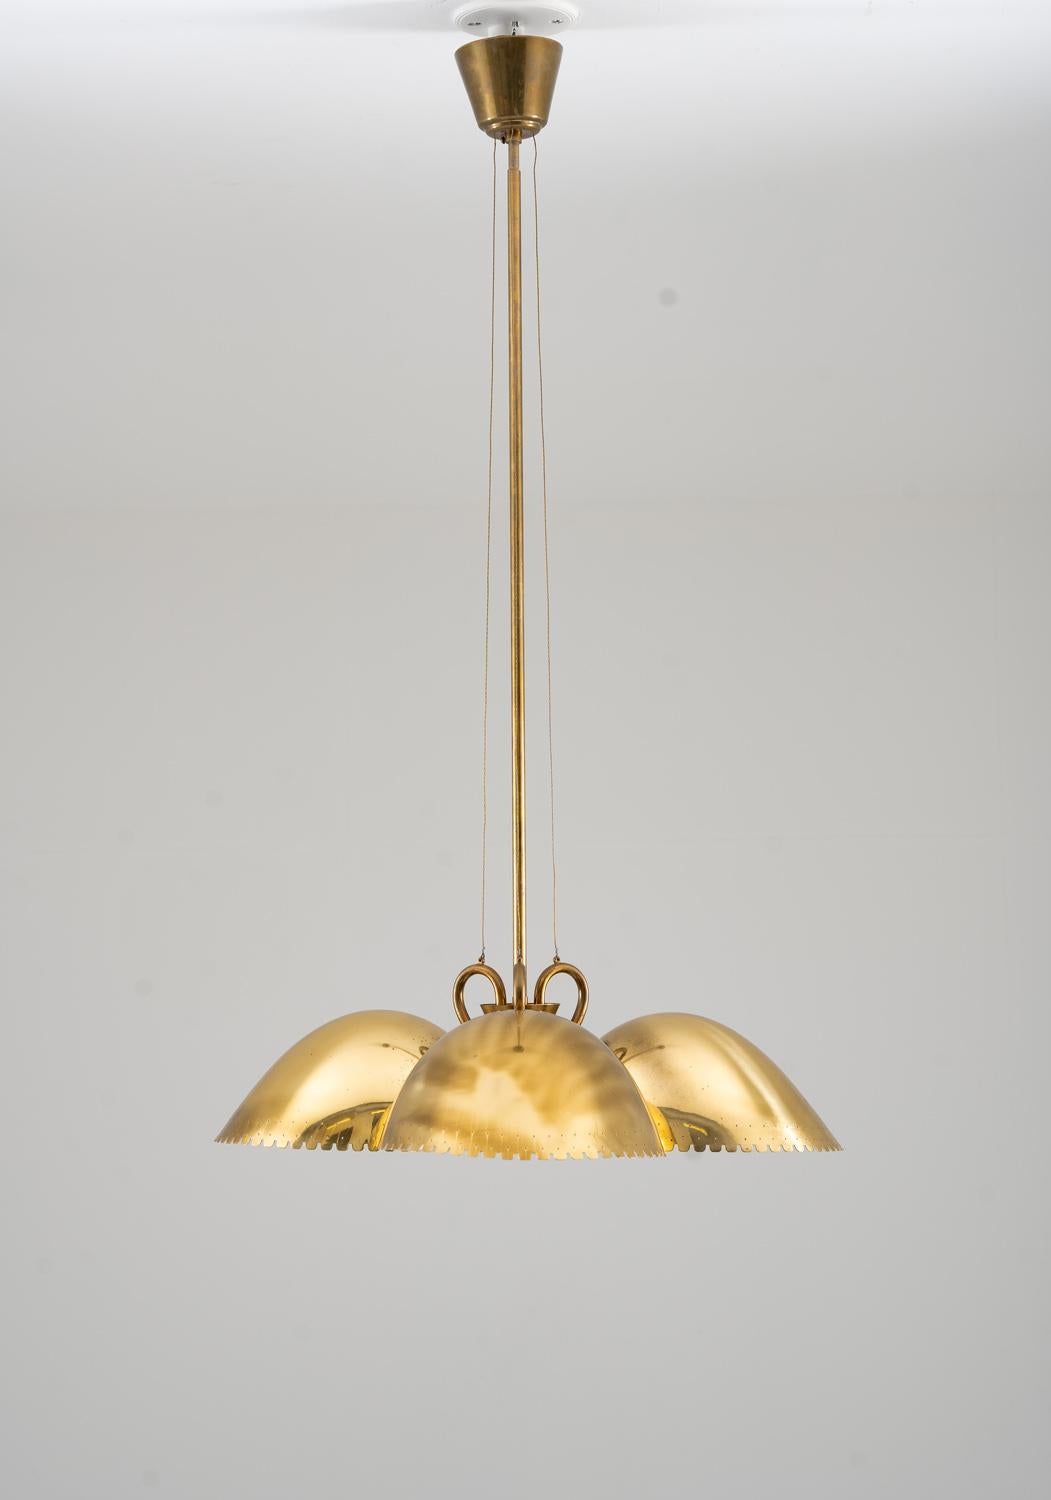 Swedish Modern Pendant by Harald Notini for Böhlmarks, Model 11894 In Good Condition For Sale In Karlstad, SE